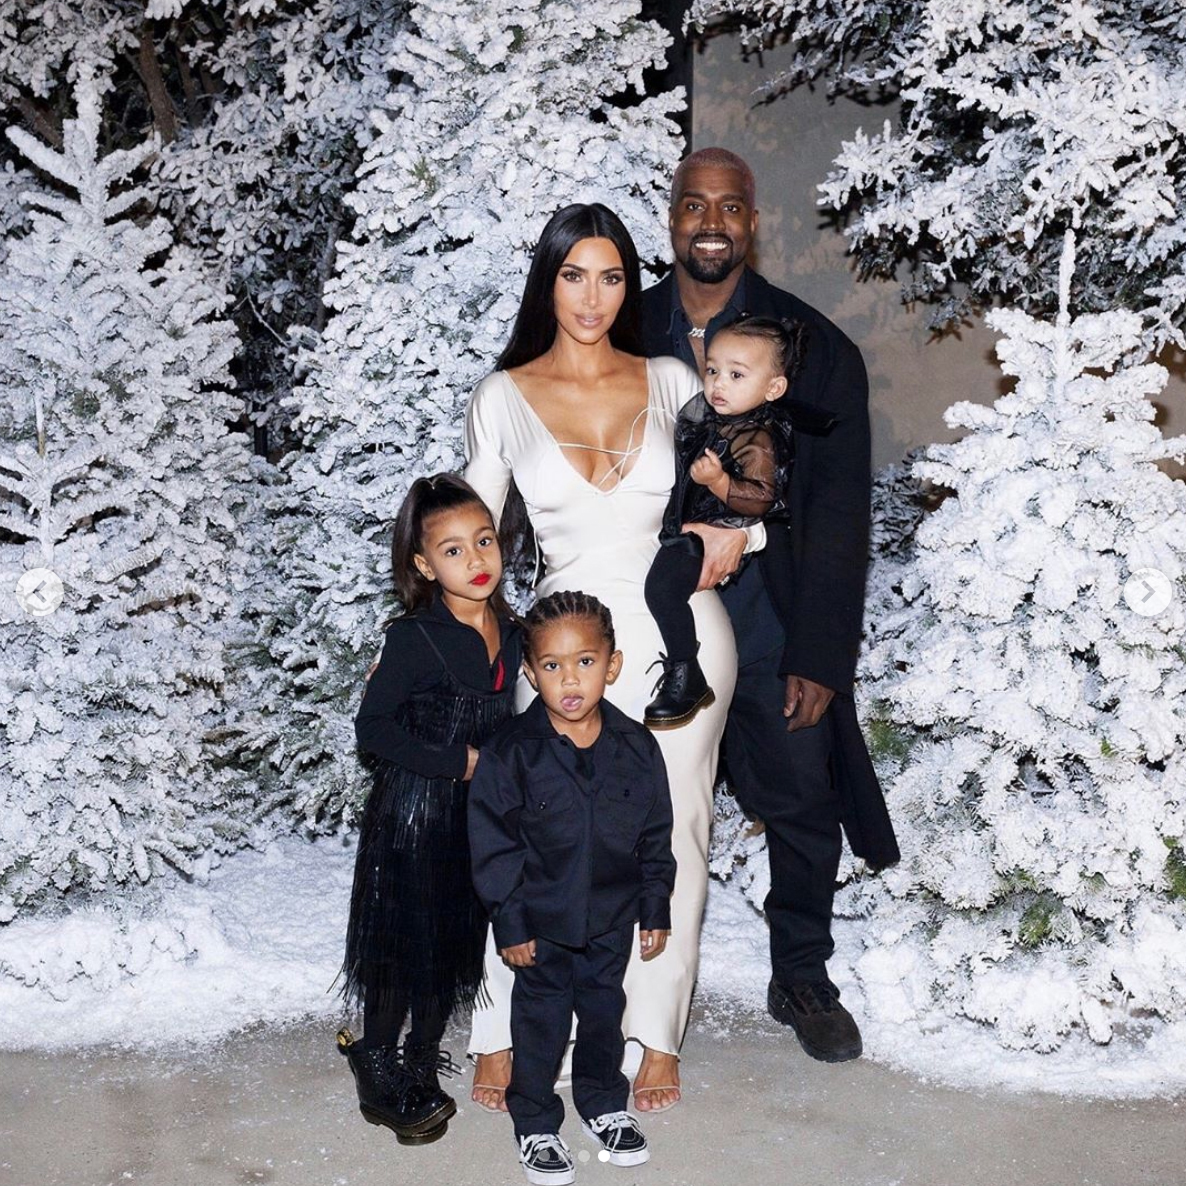 Kim and Kanye West pictured with their kids at an event in 2018